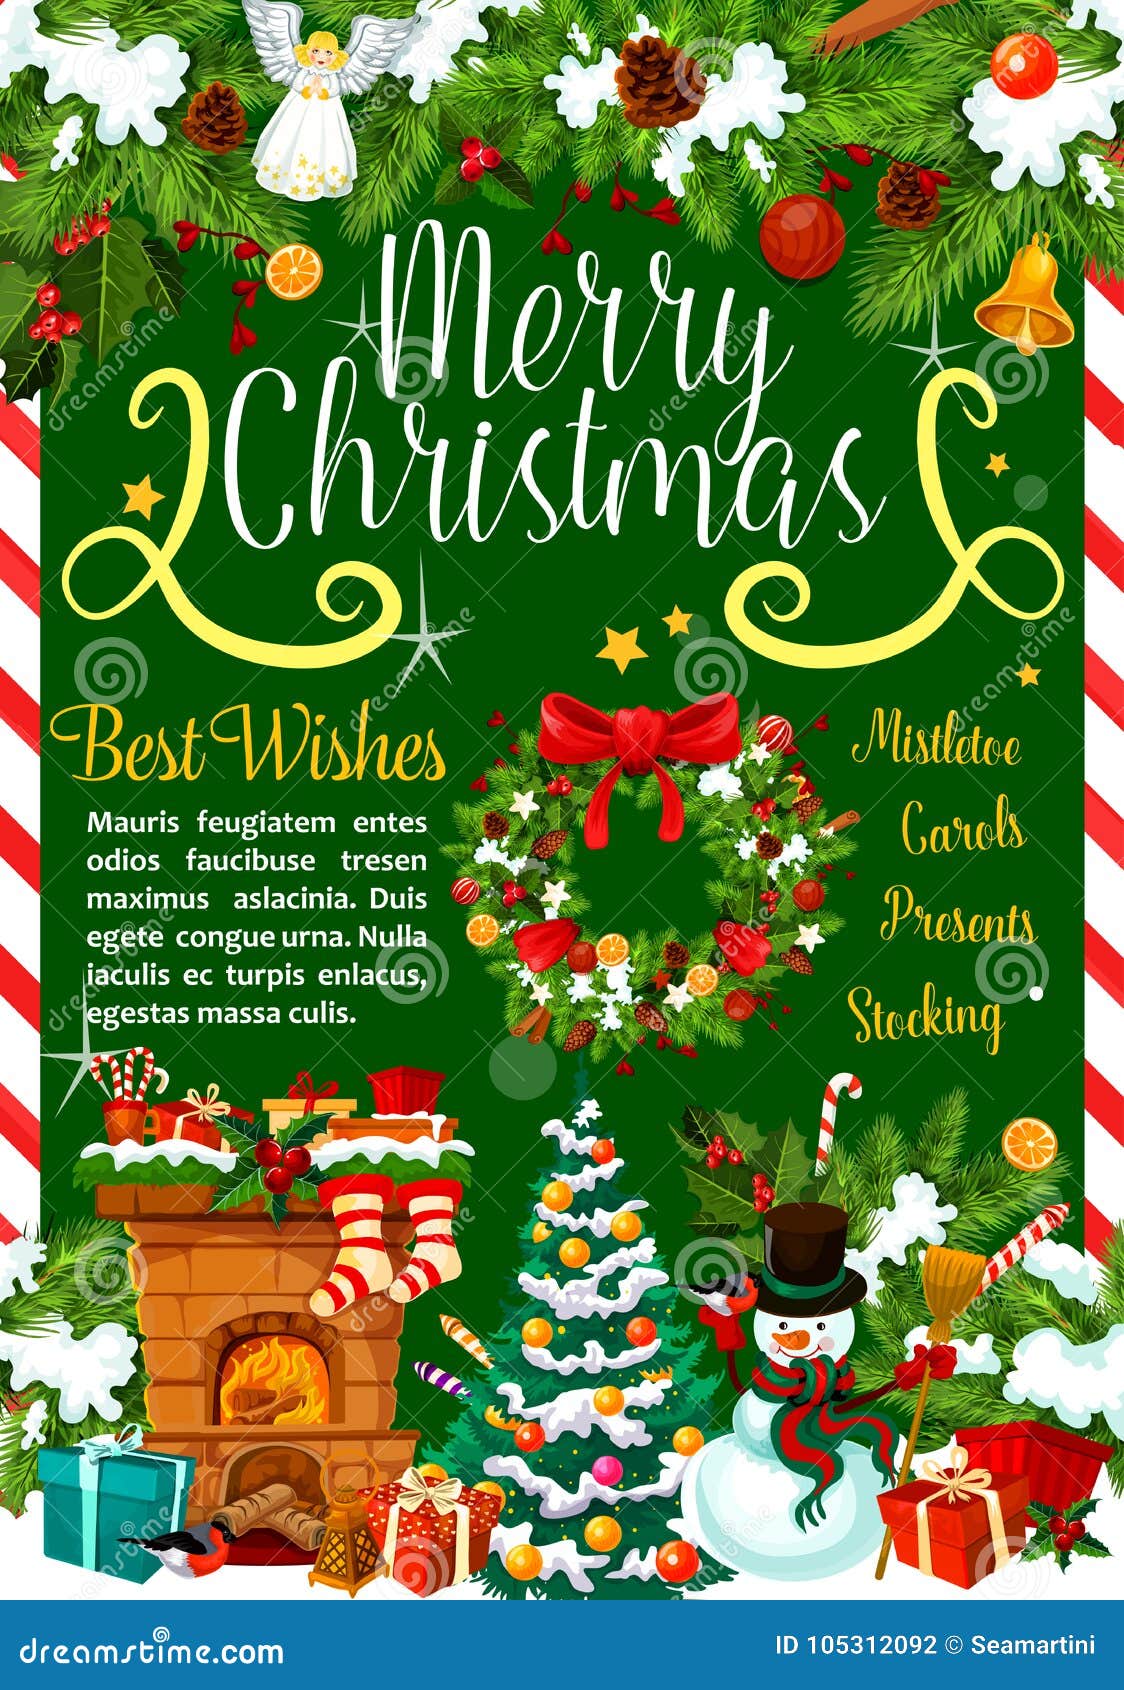 Christmas Greetings Vector Gifts and Decorations Stock Vector ...